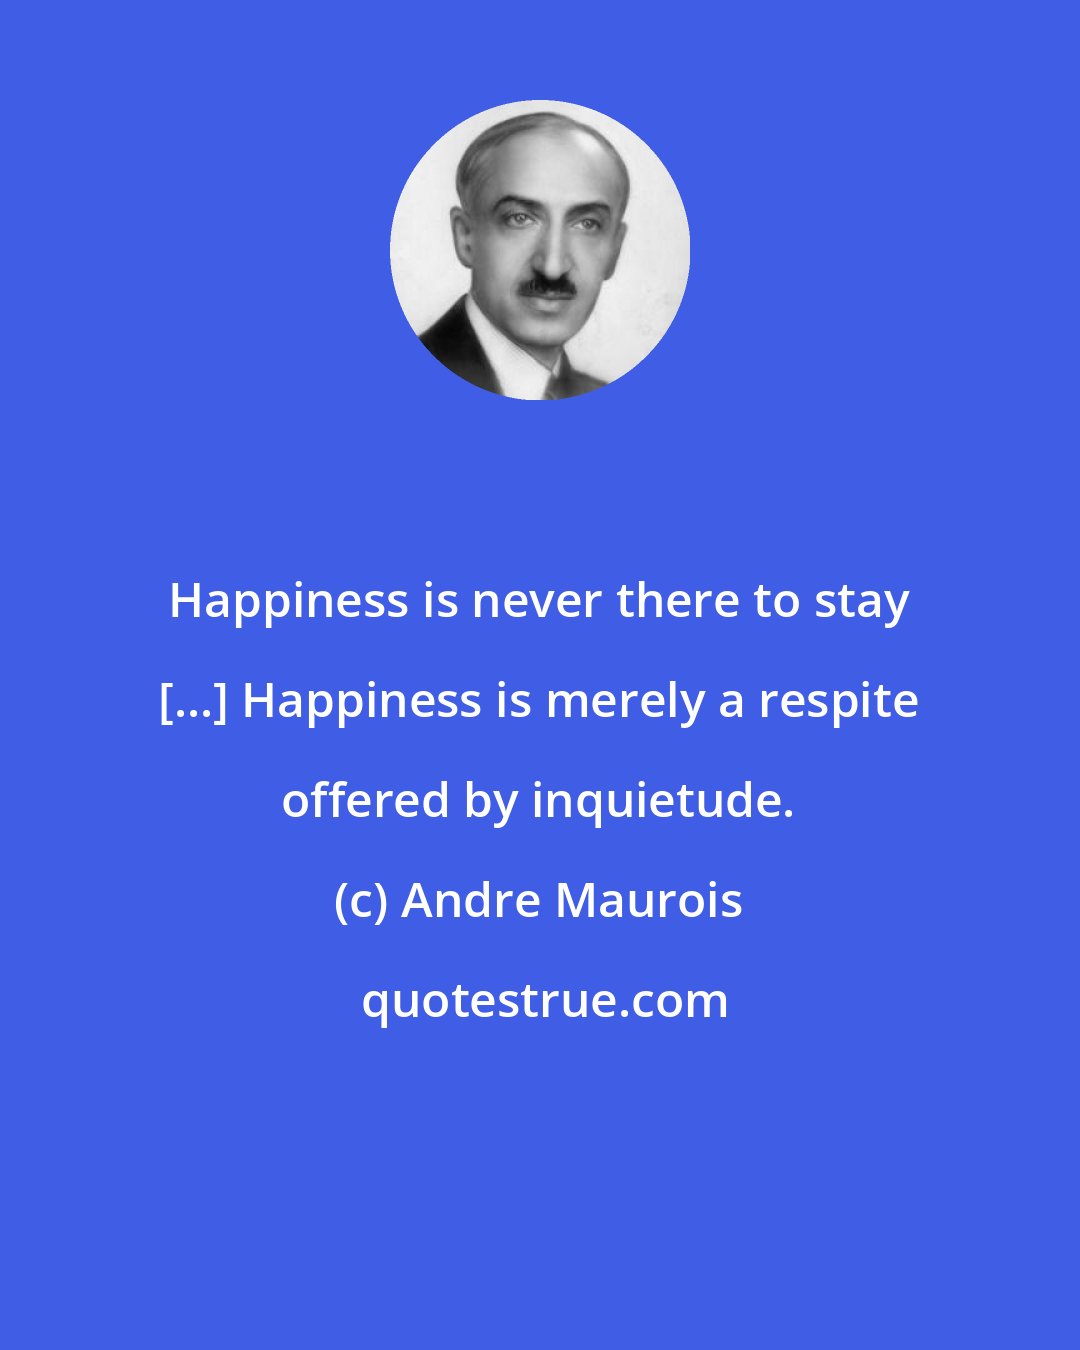 Andre Maurois: Happiness is never there to stay [...] Happiness is merely a respite offered by inquietude.